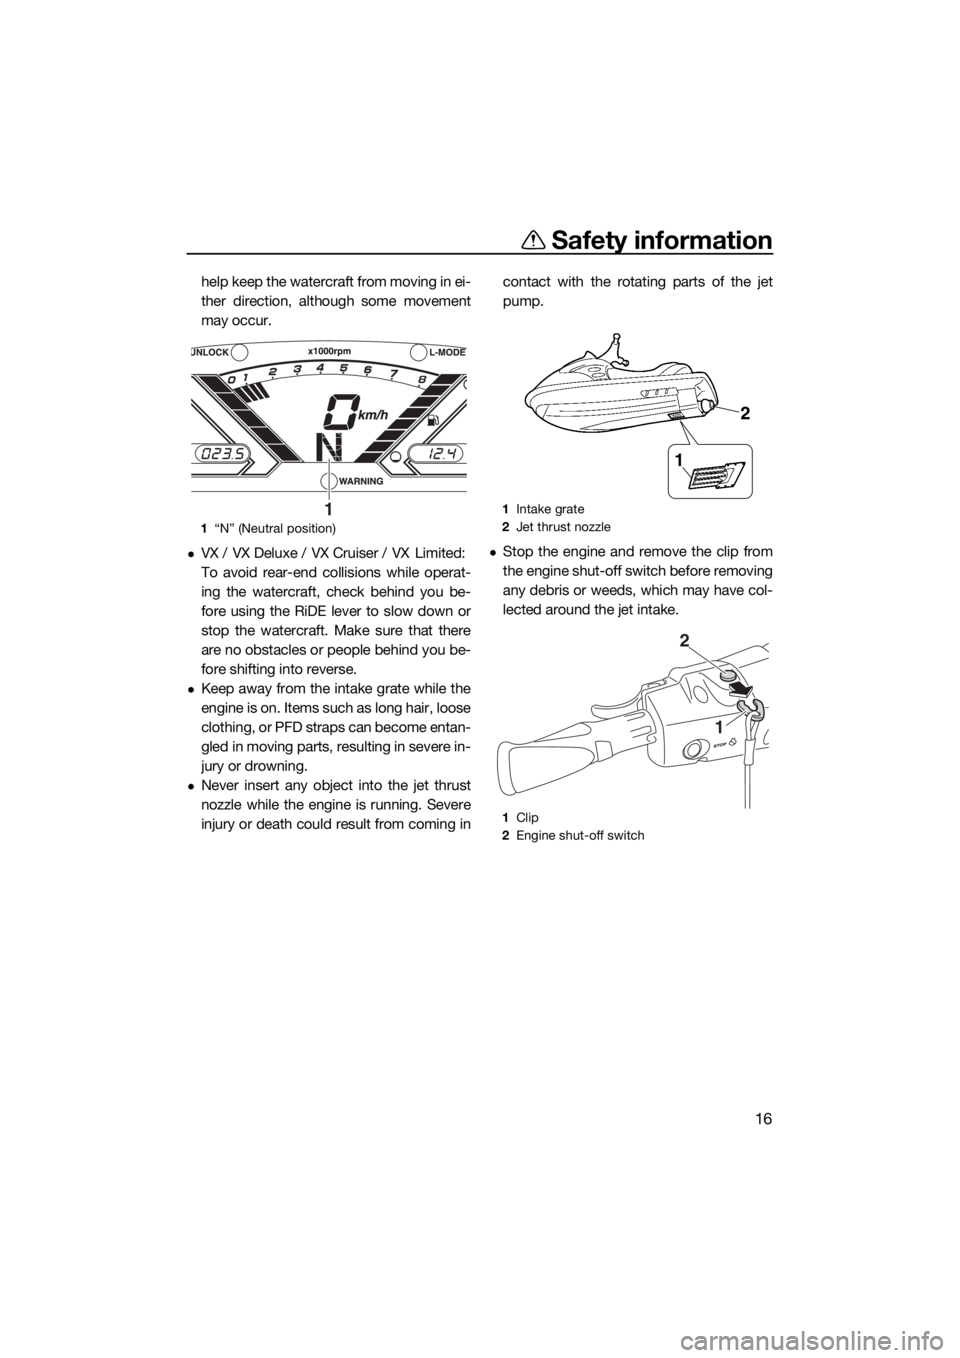 YAMAHA VX CRUISER 2020  Owners Manual Safety information
16
help keep the watercraft from moving in ei-
ther direction, although some movement
may occur.
VX / VX Deluxe / VX Cruiser / VX Limited: 
To avoid rear-end collisions while ope